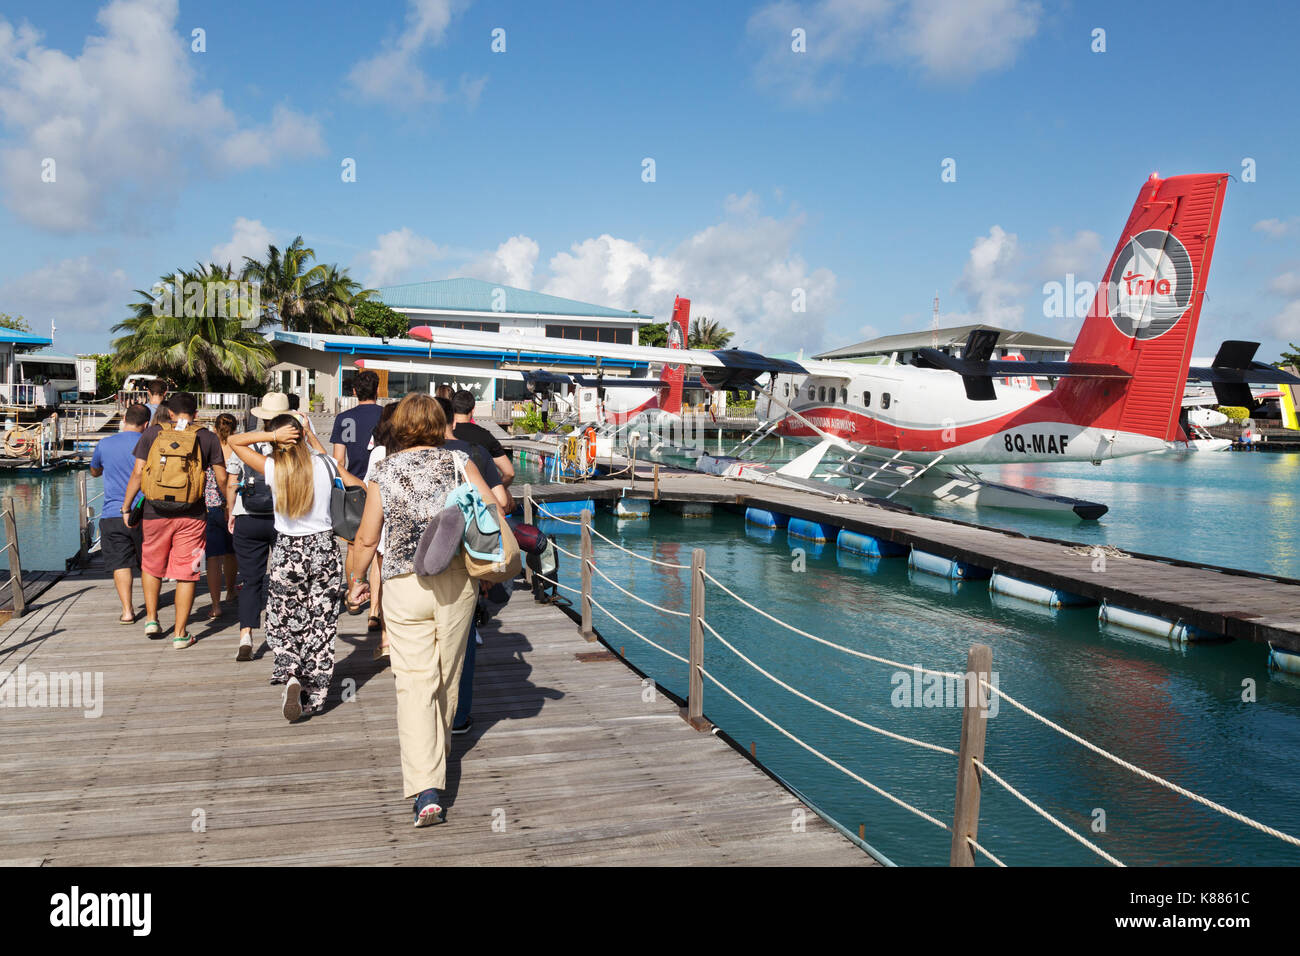 Tourists and Trans Maldivian Airways seaplanes at Male airport, Male, Maldives, Asia Stock Photo